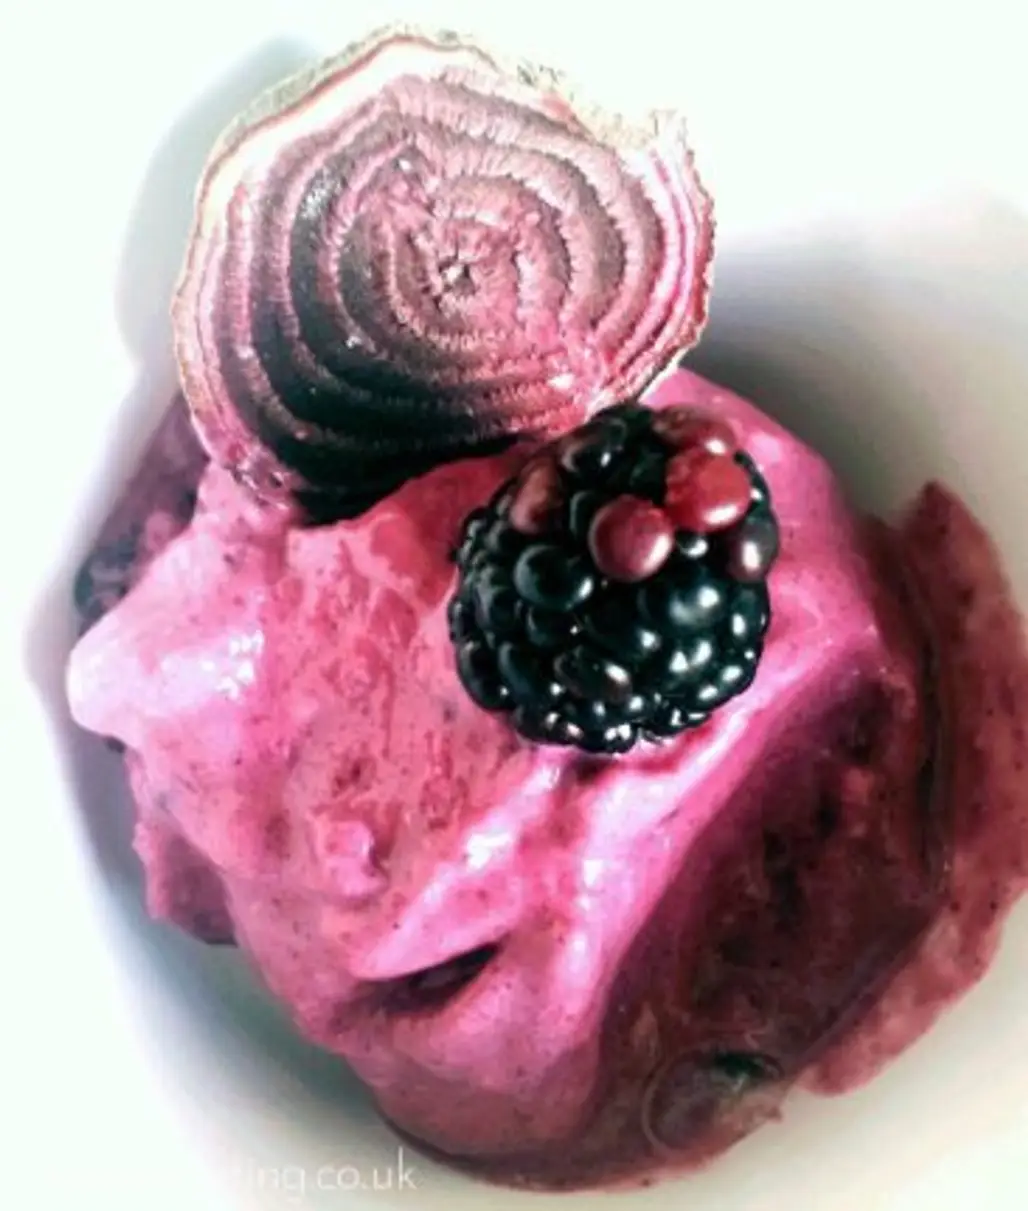 Goat Cheese, Beetroot and Blackberry Ice Cream